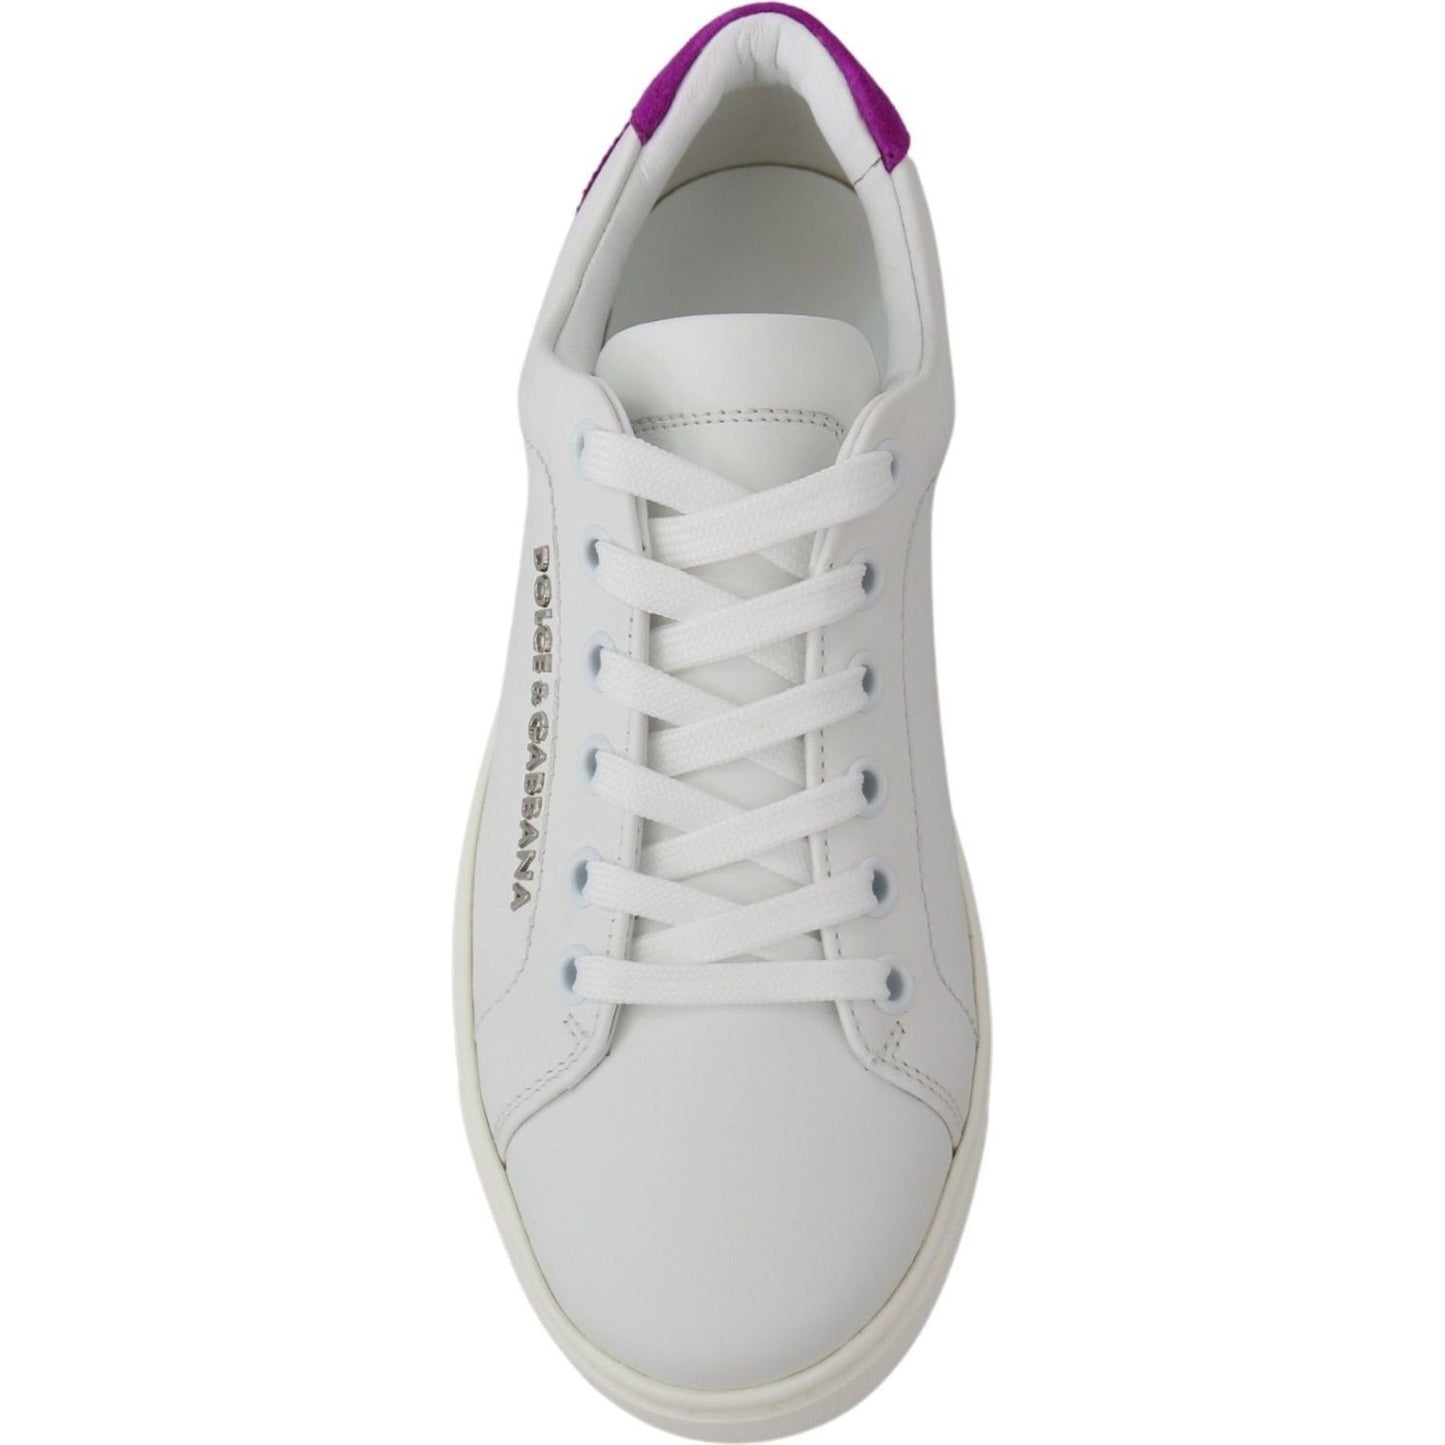 Dolce & Gabbana Chic White Leather Sneakers with Purple Accents white-purple-leather-logo-womens-shoes WOMAN SNEAKERS